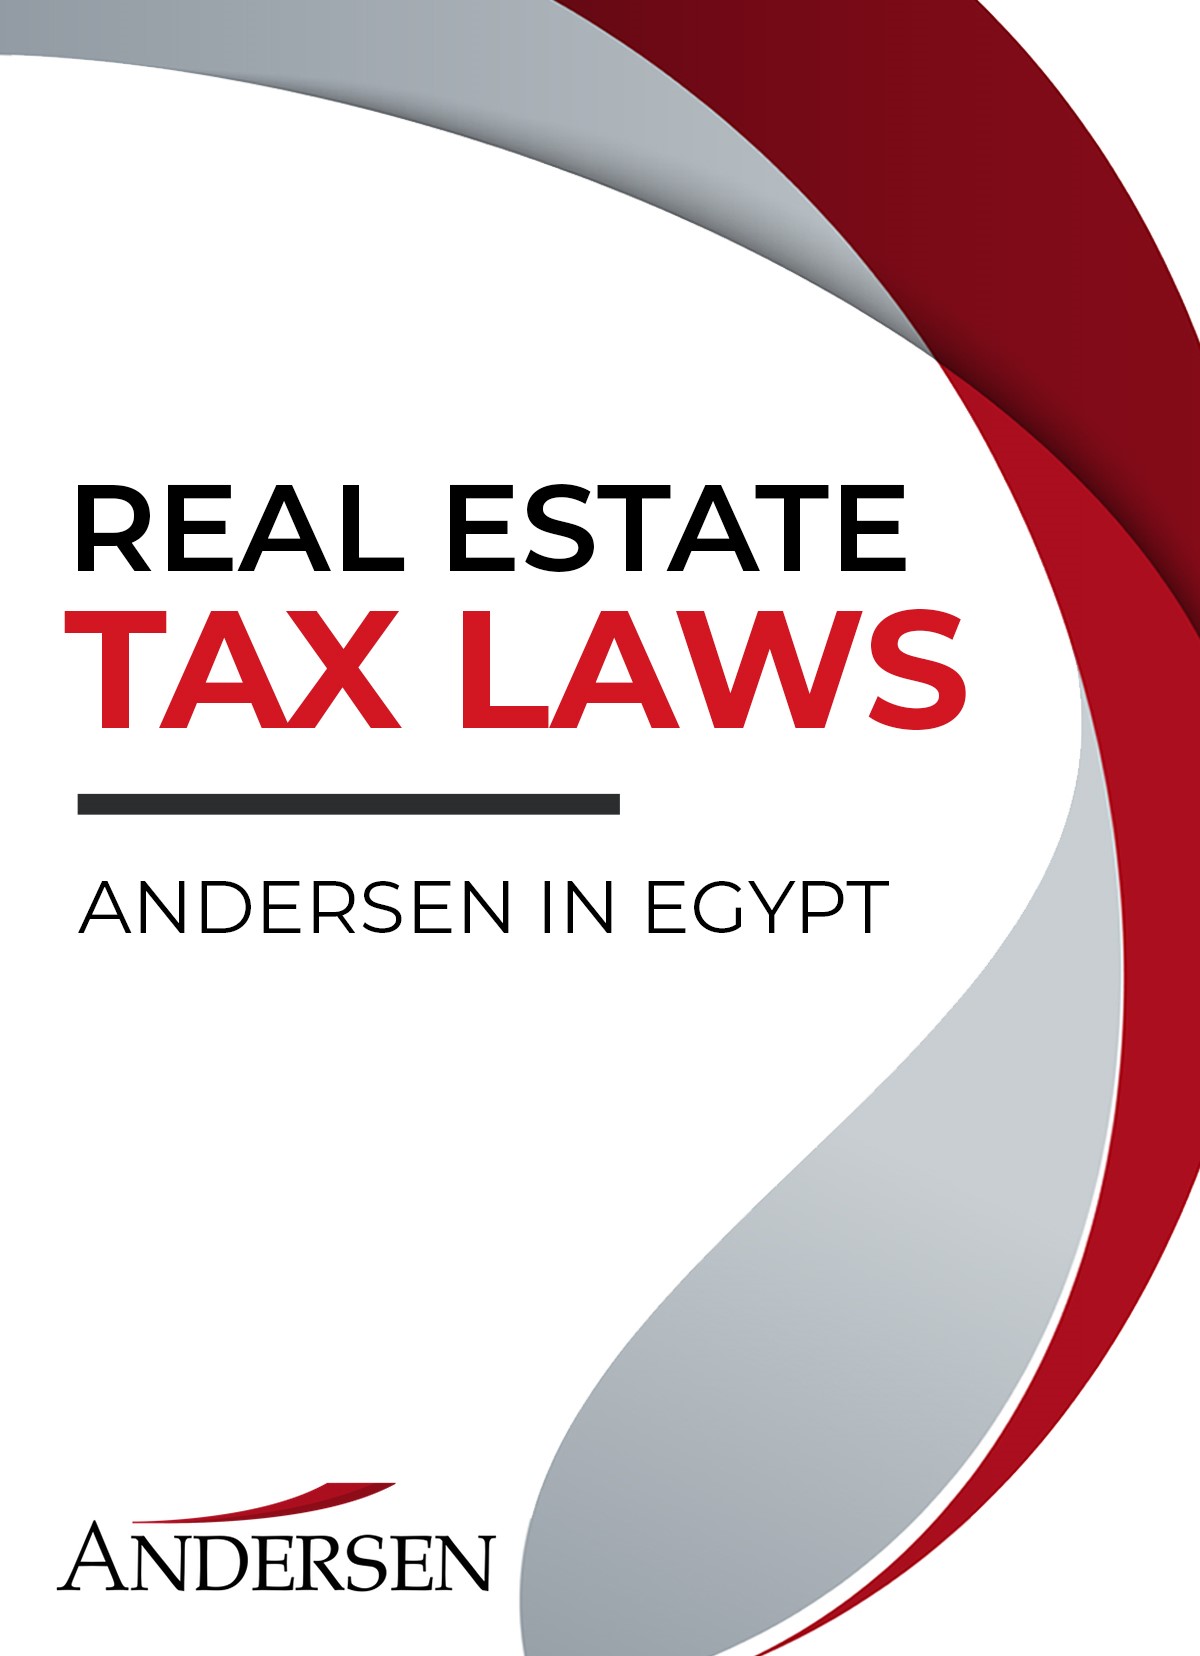 Real Estate Tax Laws in Egypt